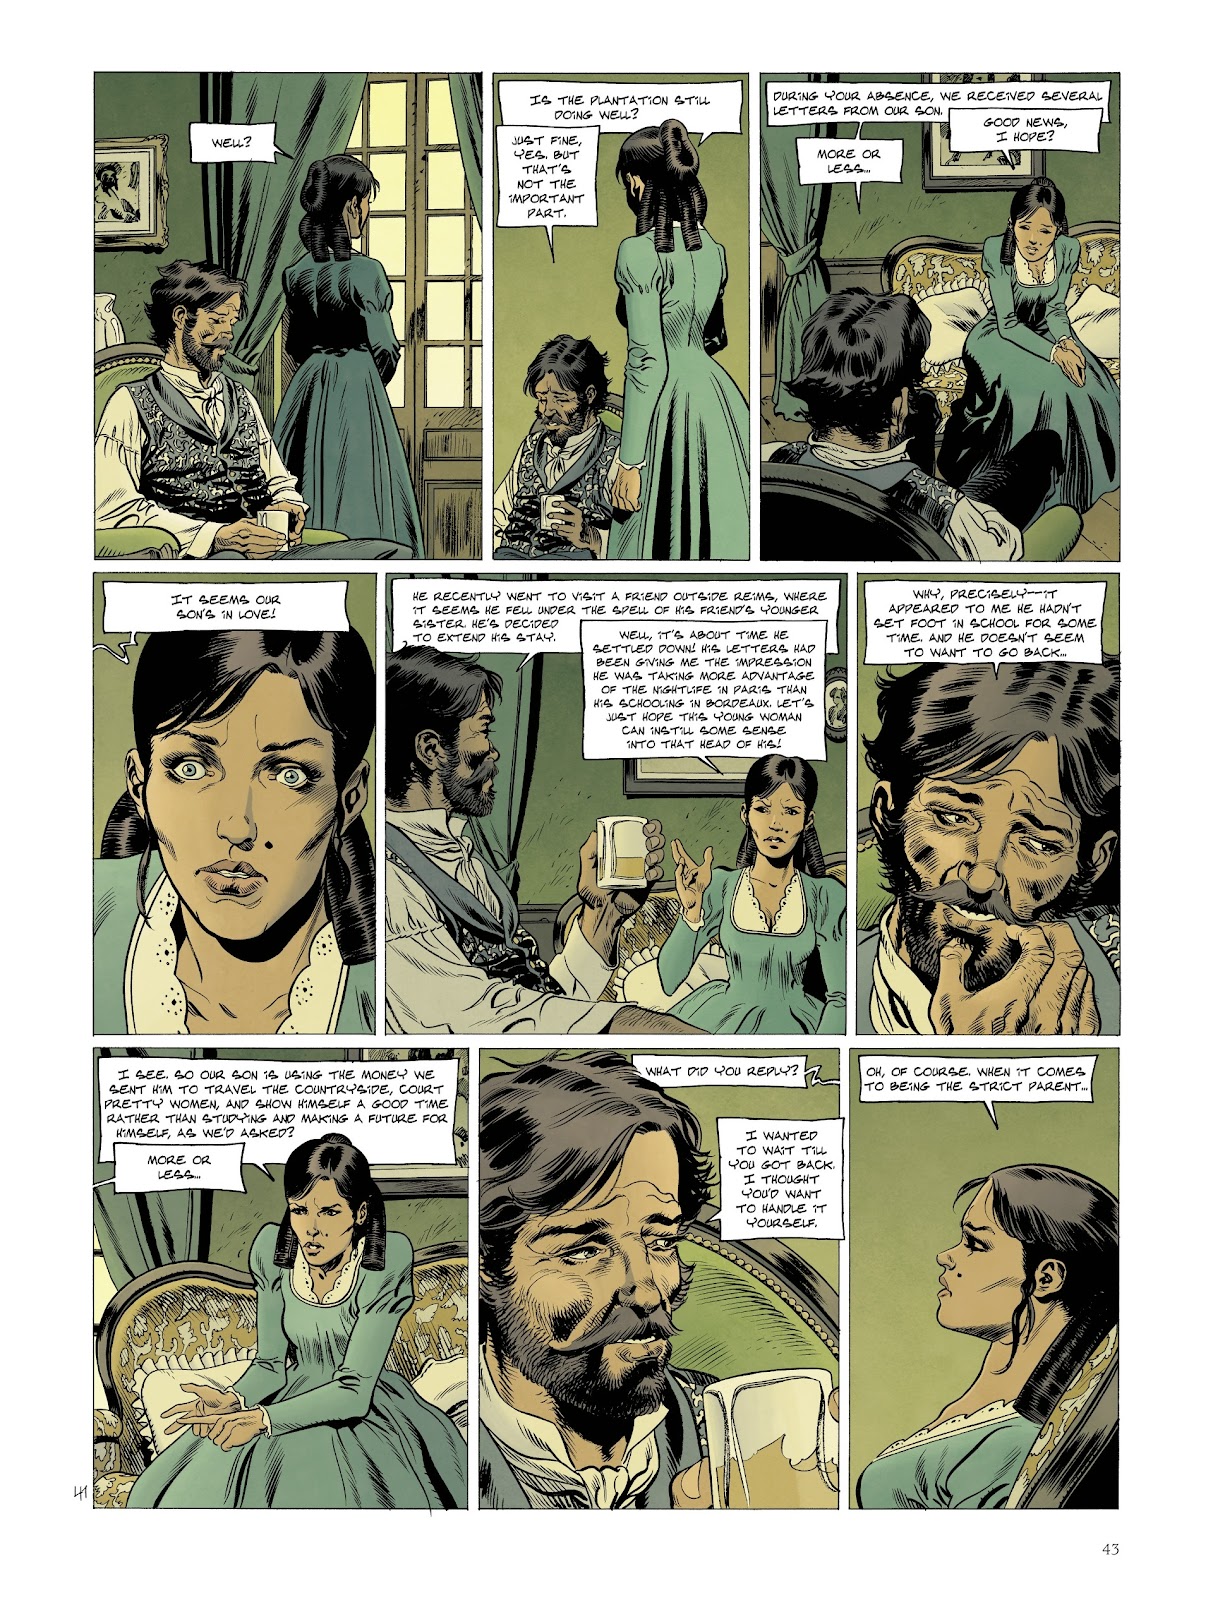 Louisiana: The Color of Blood issue 1 - Page 45